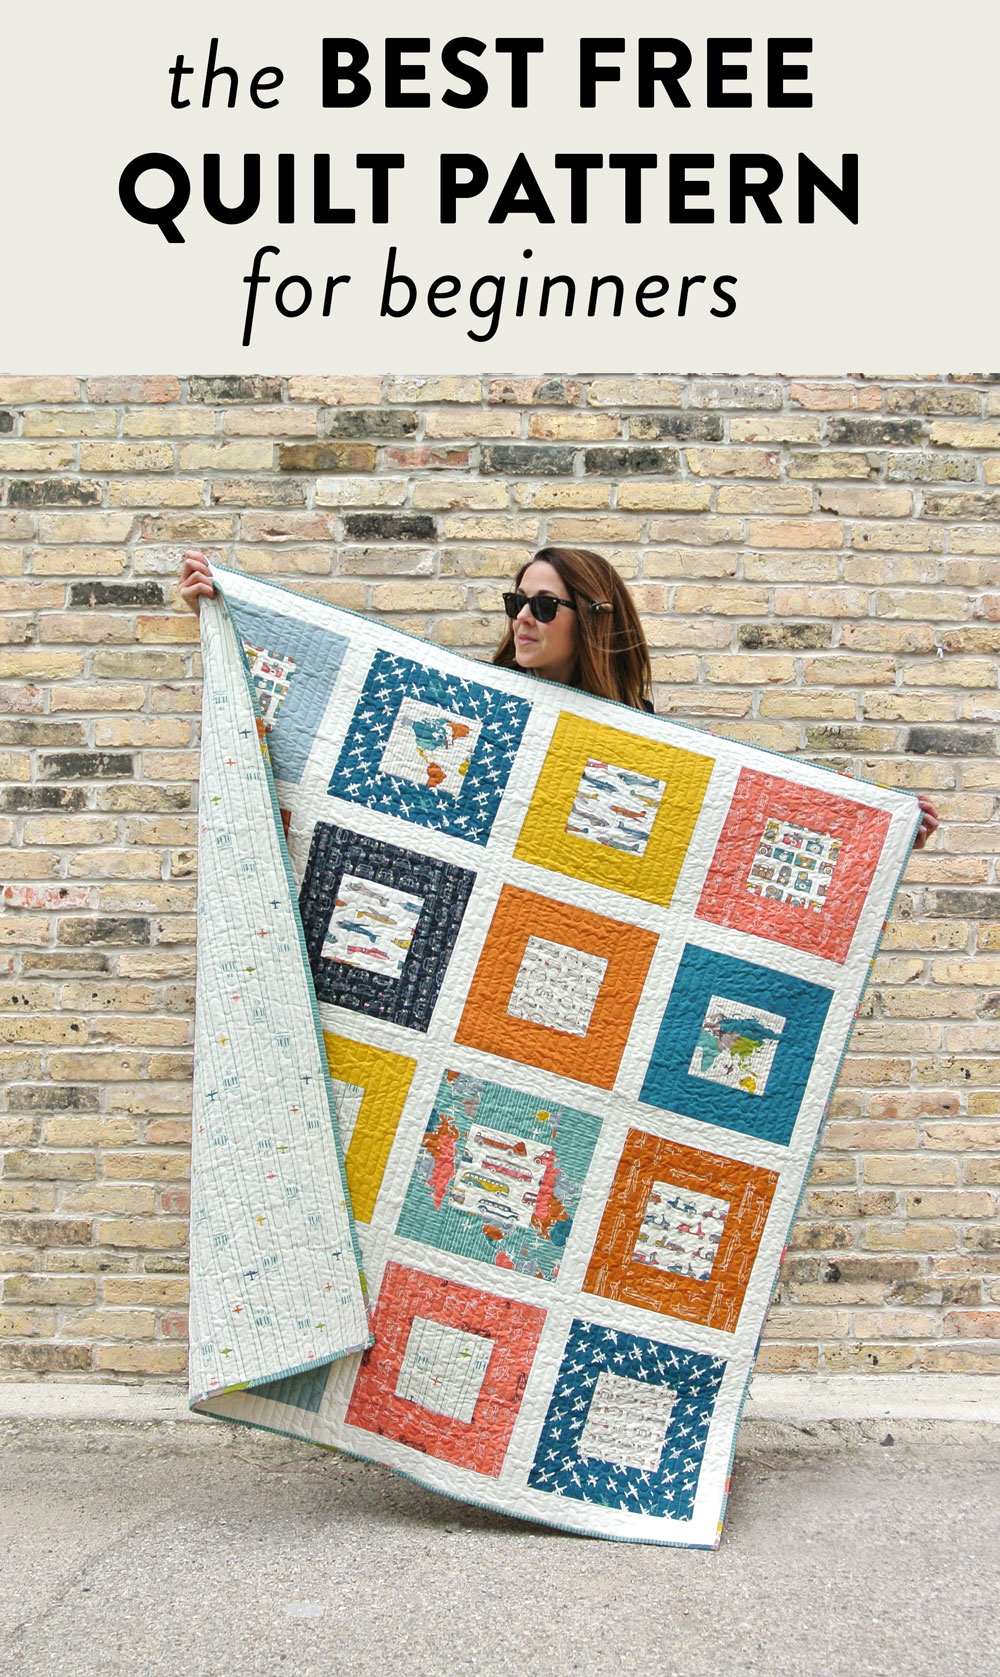 memory quilt patterns free